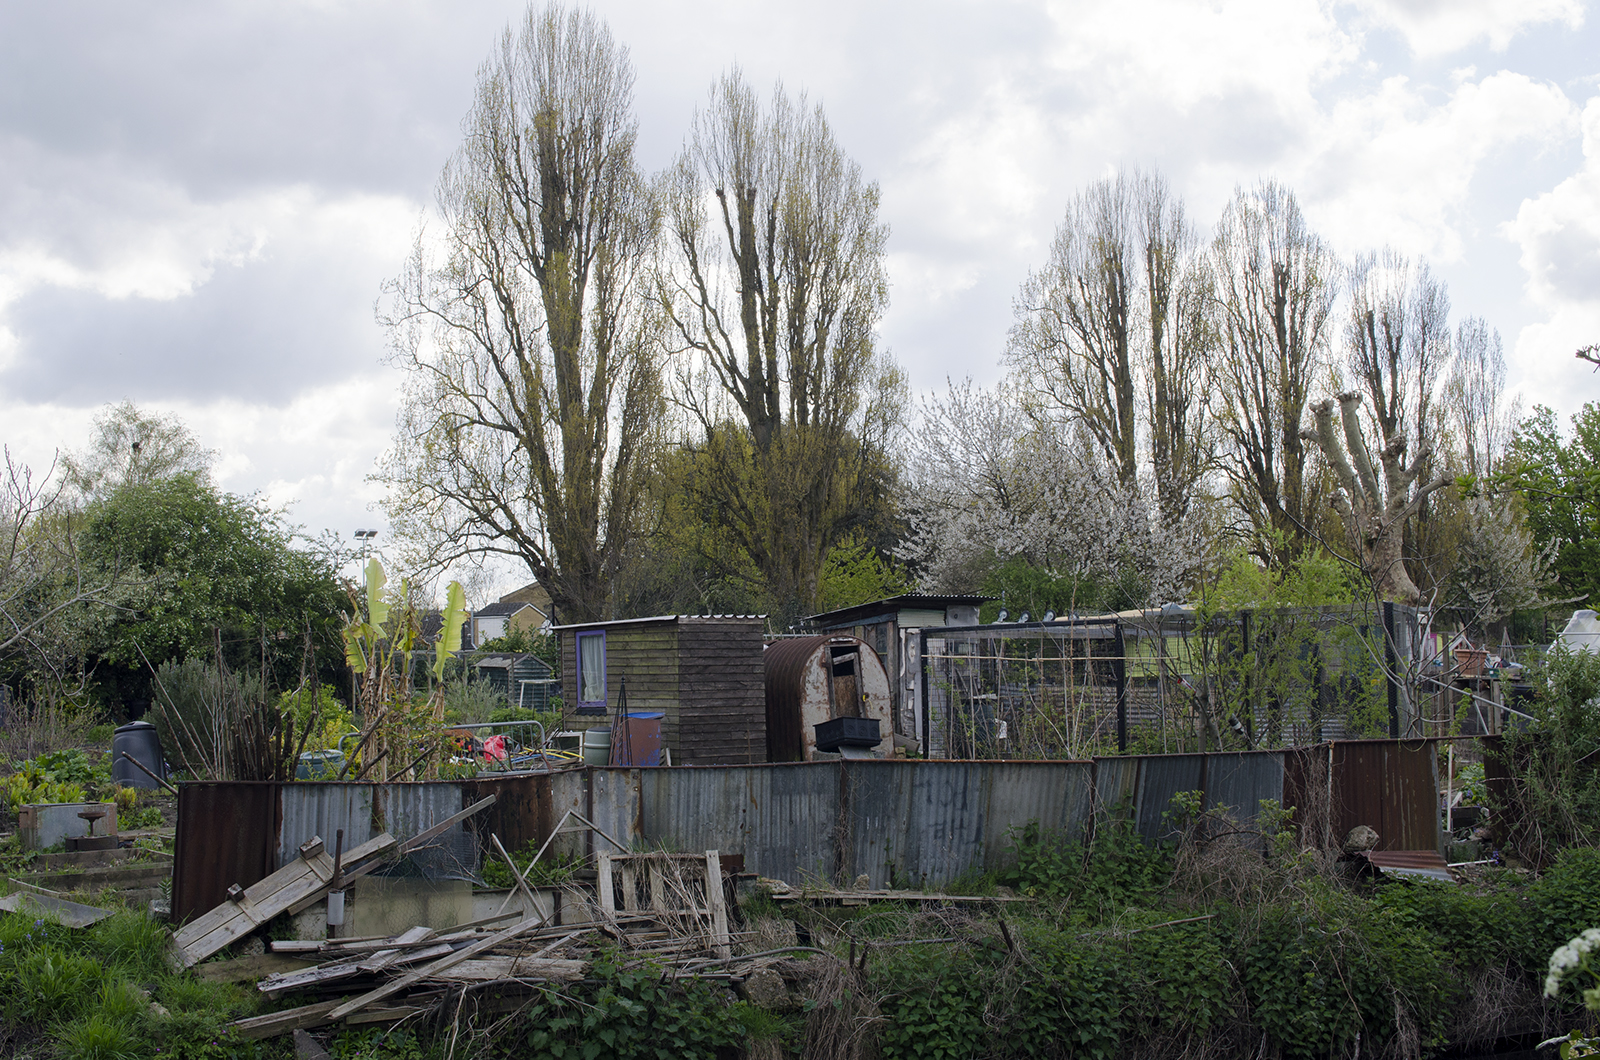 2016-04-27-Merton_Wandle-Path_Looking-over-the-River-Wandle-to-Allotments-in-Wandsworth